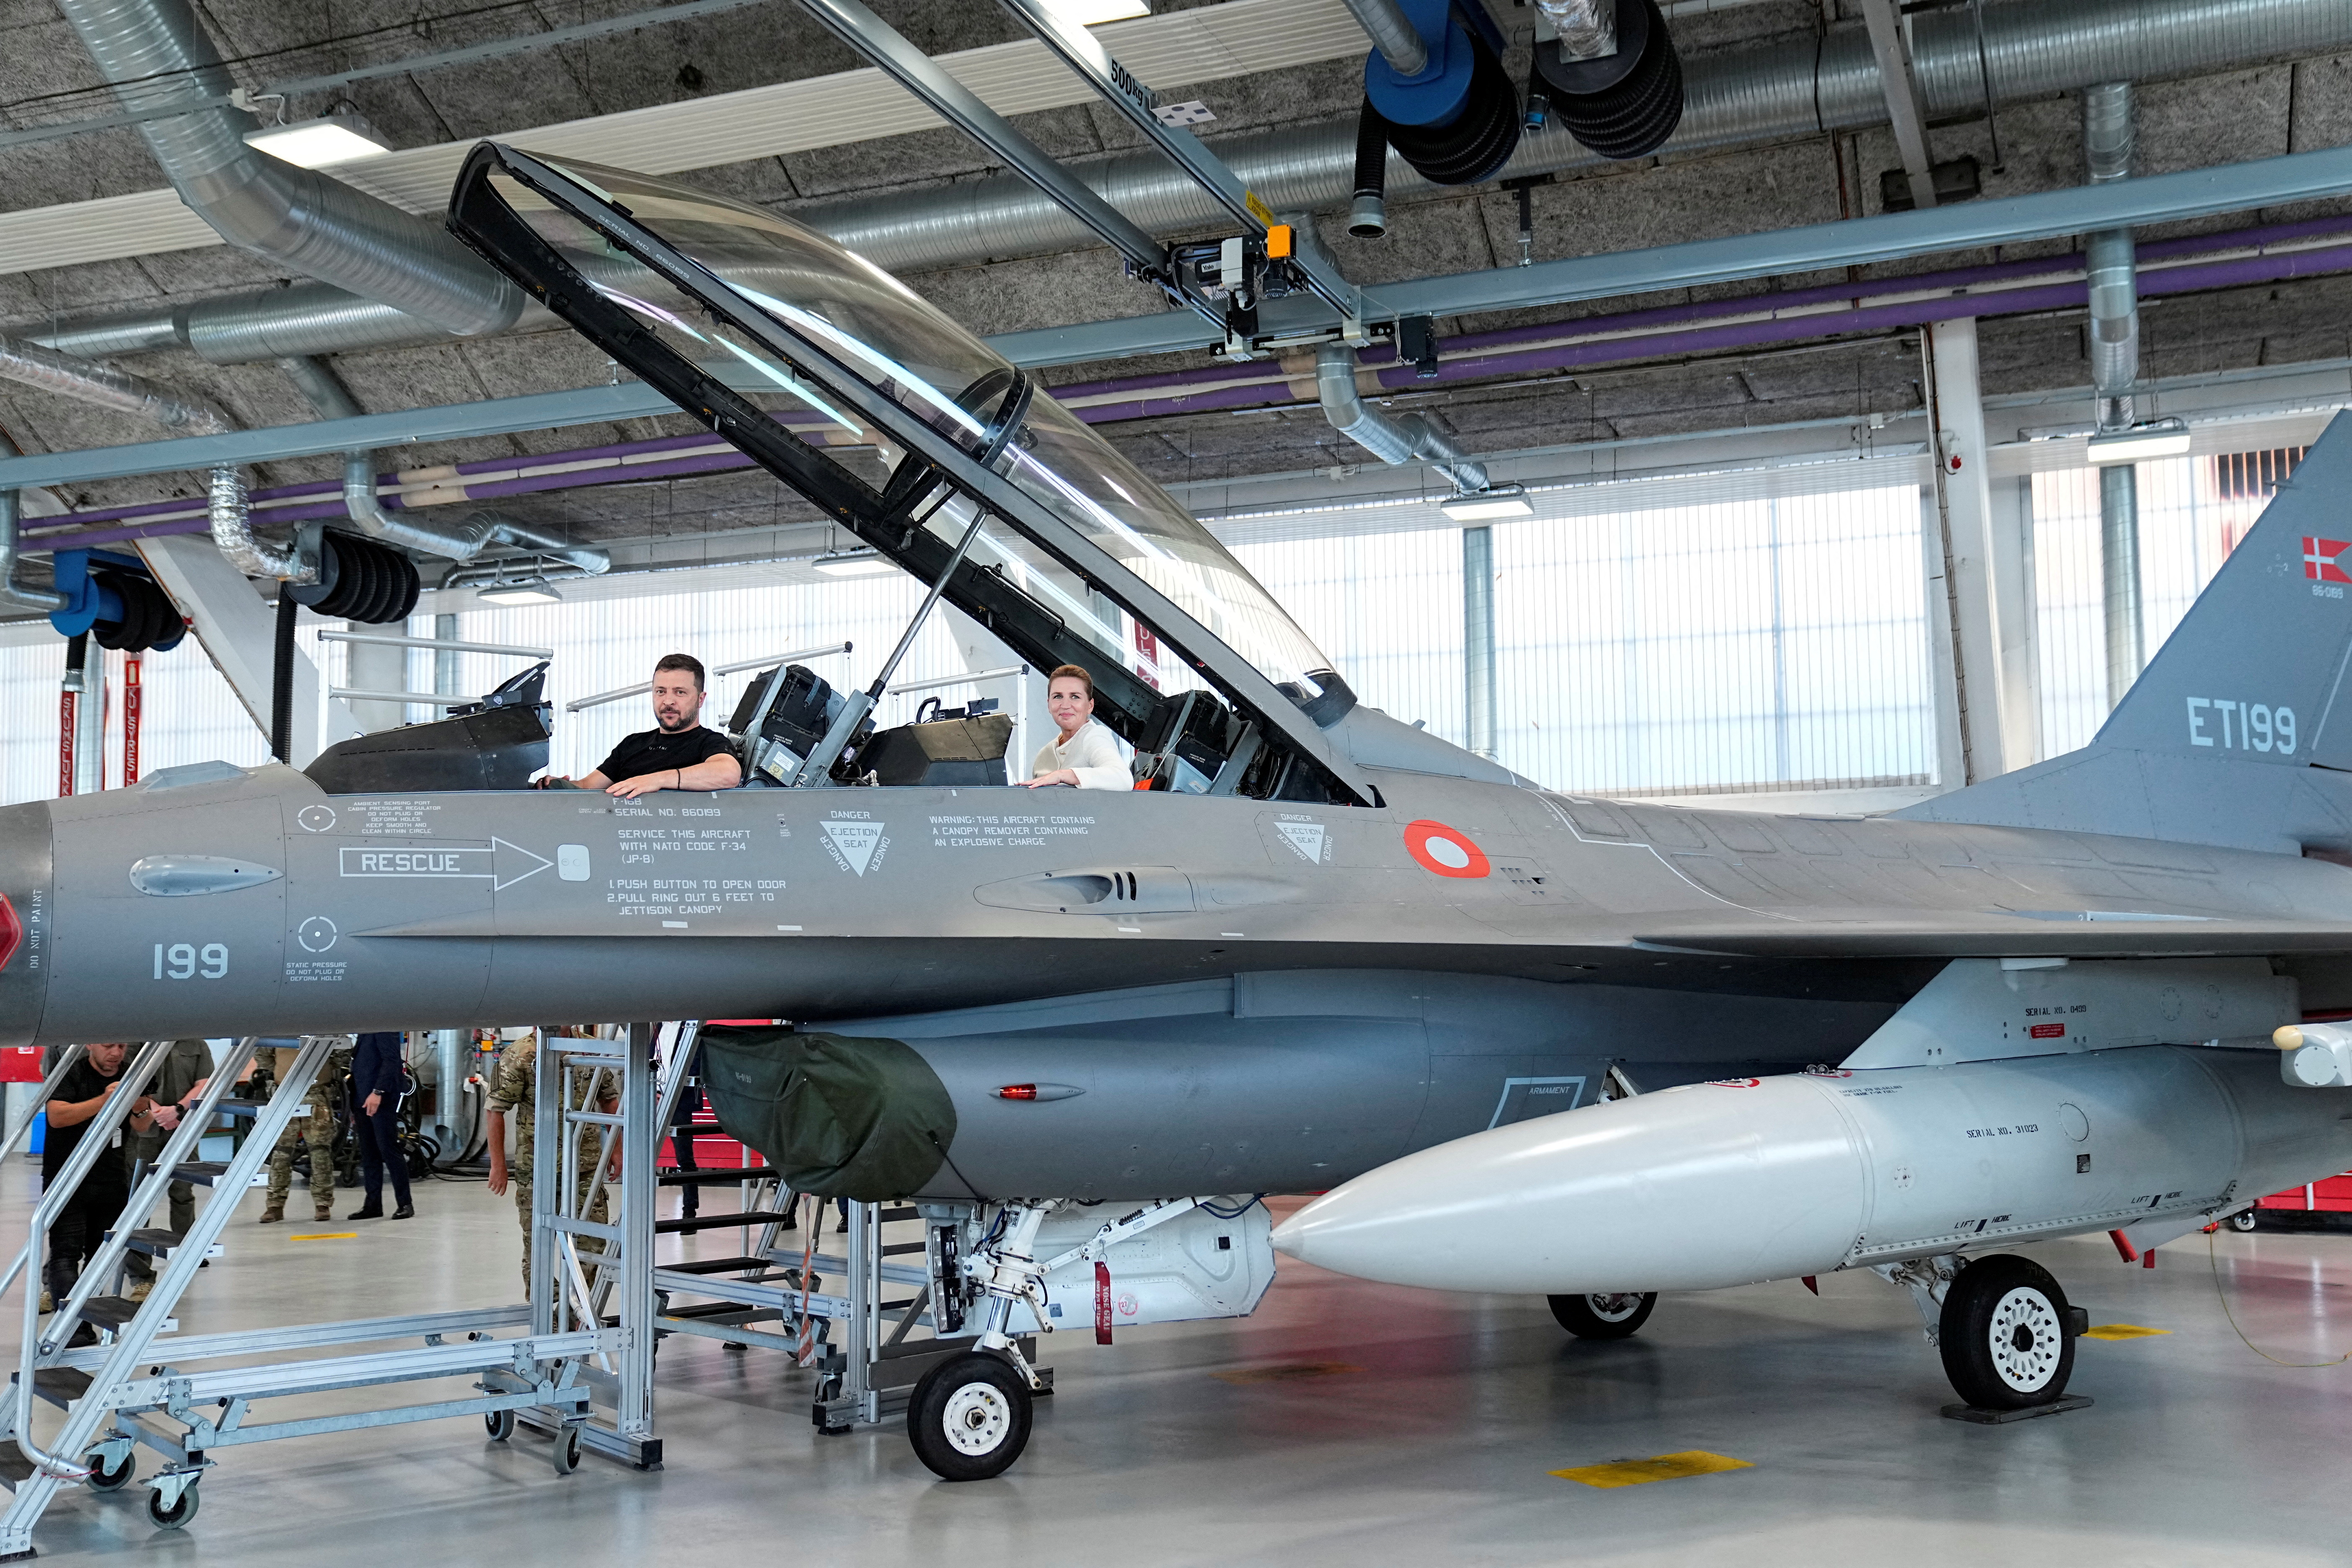 Ukraine Set To Receive The First Batch Of F-16s Soon